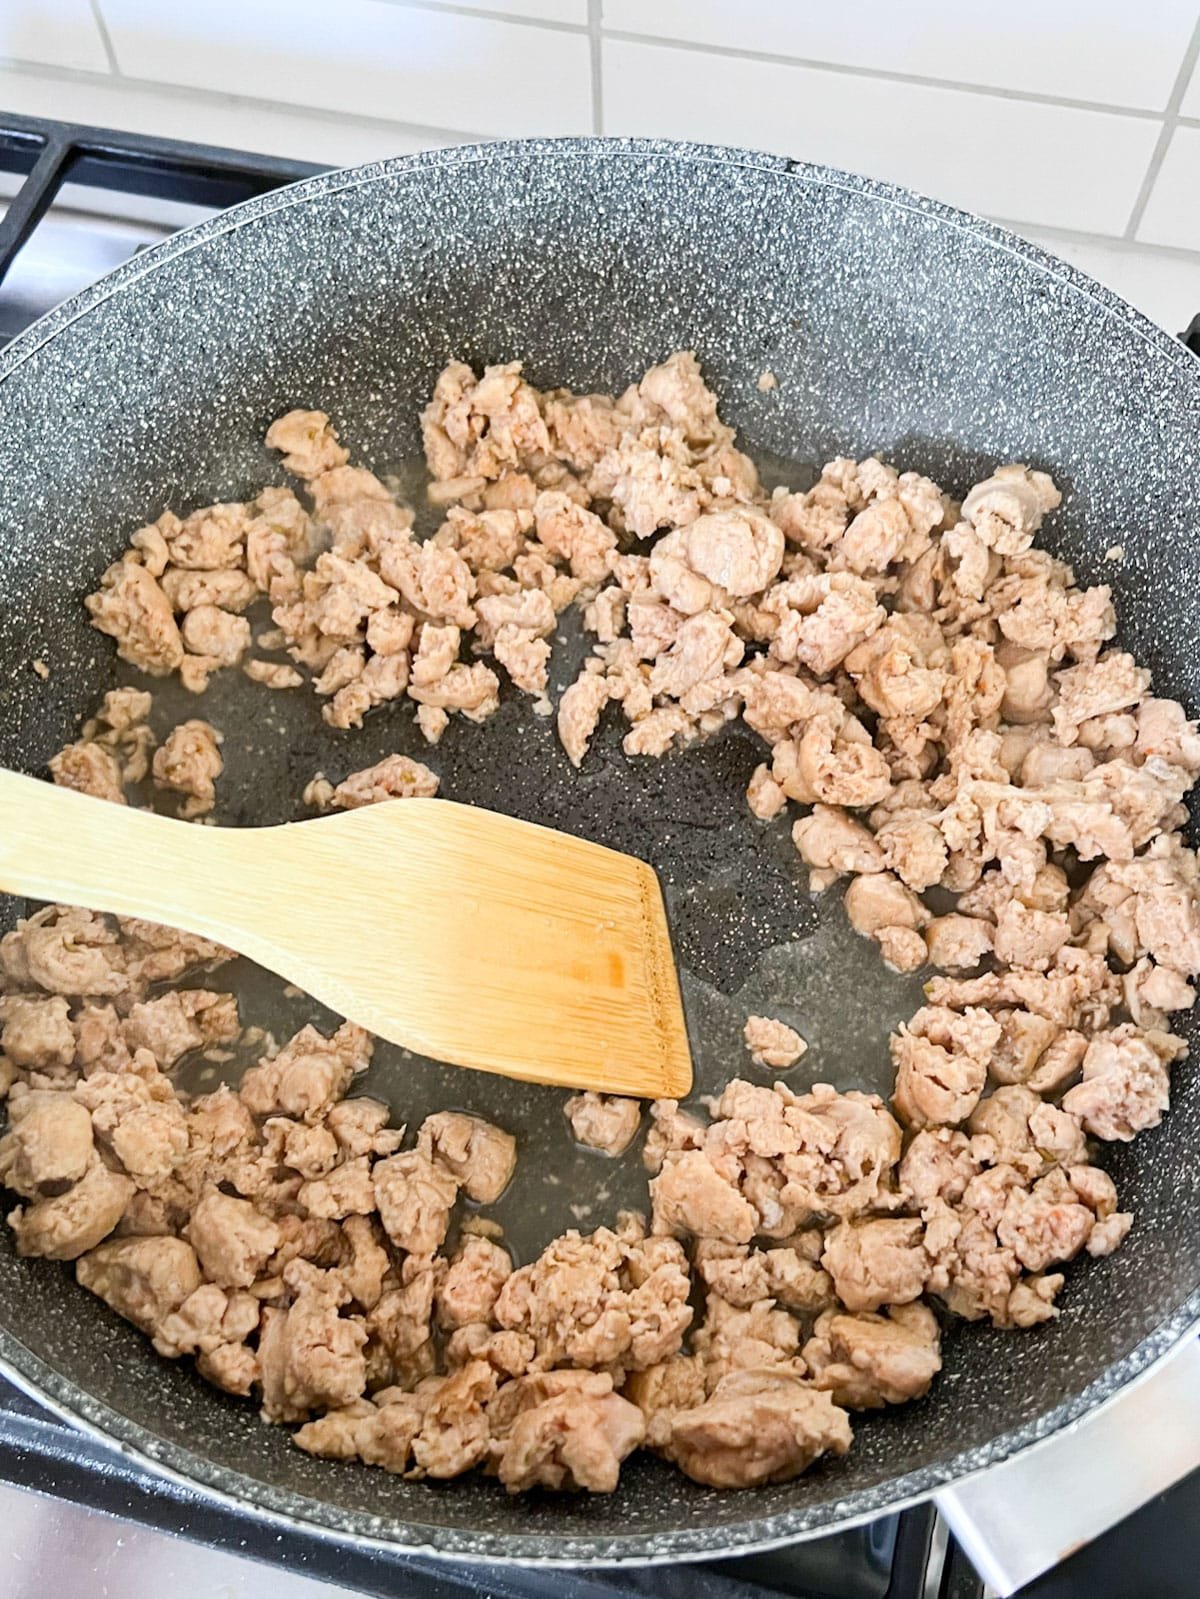 A wooden spoon deglazing the pan of sausage with white wine.